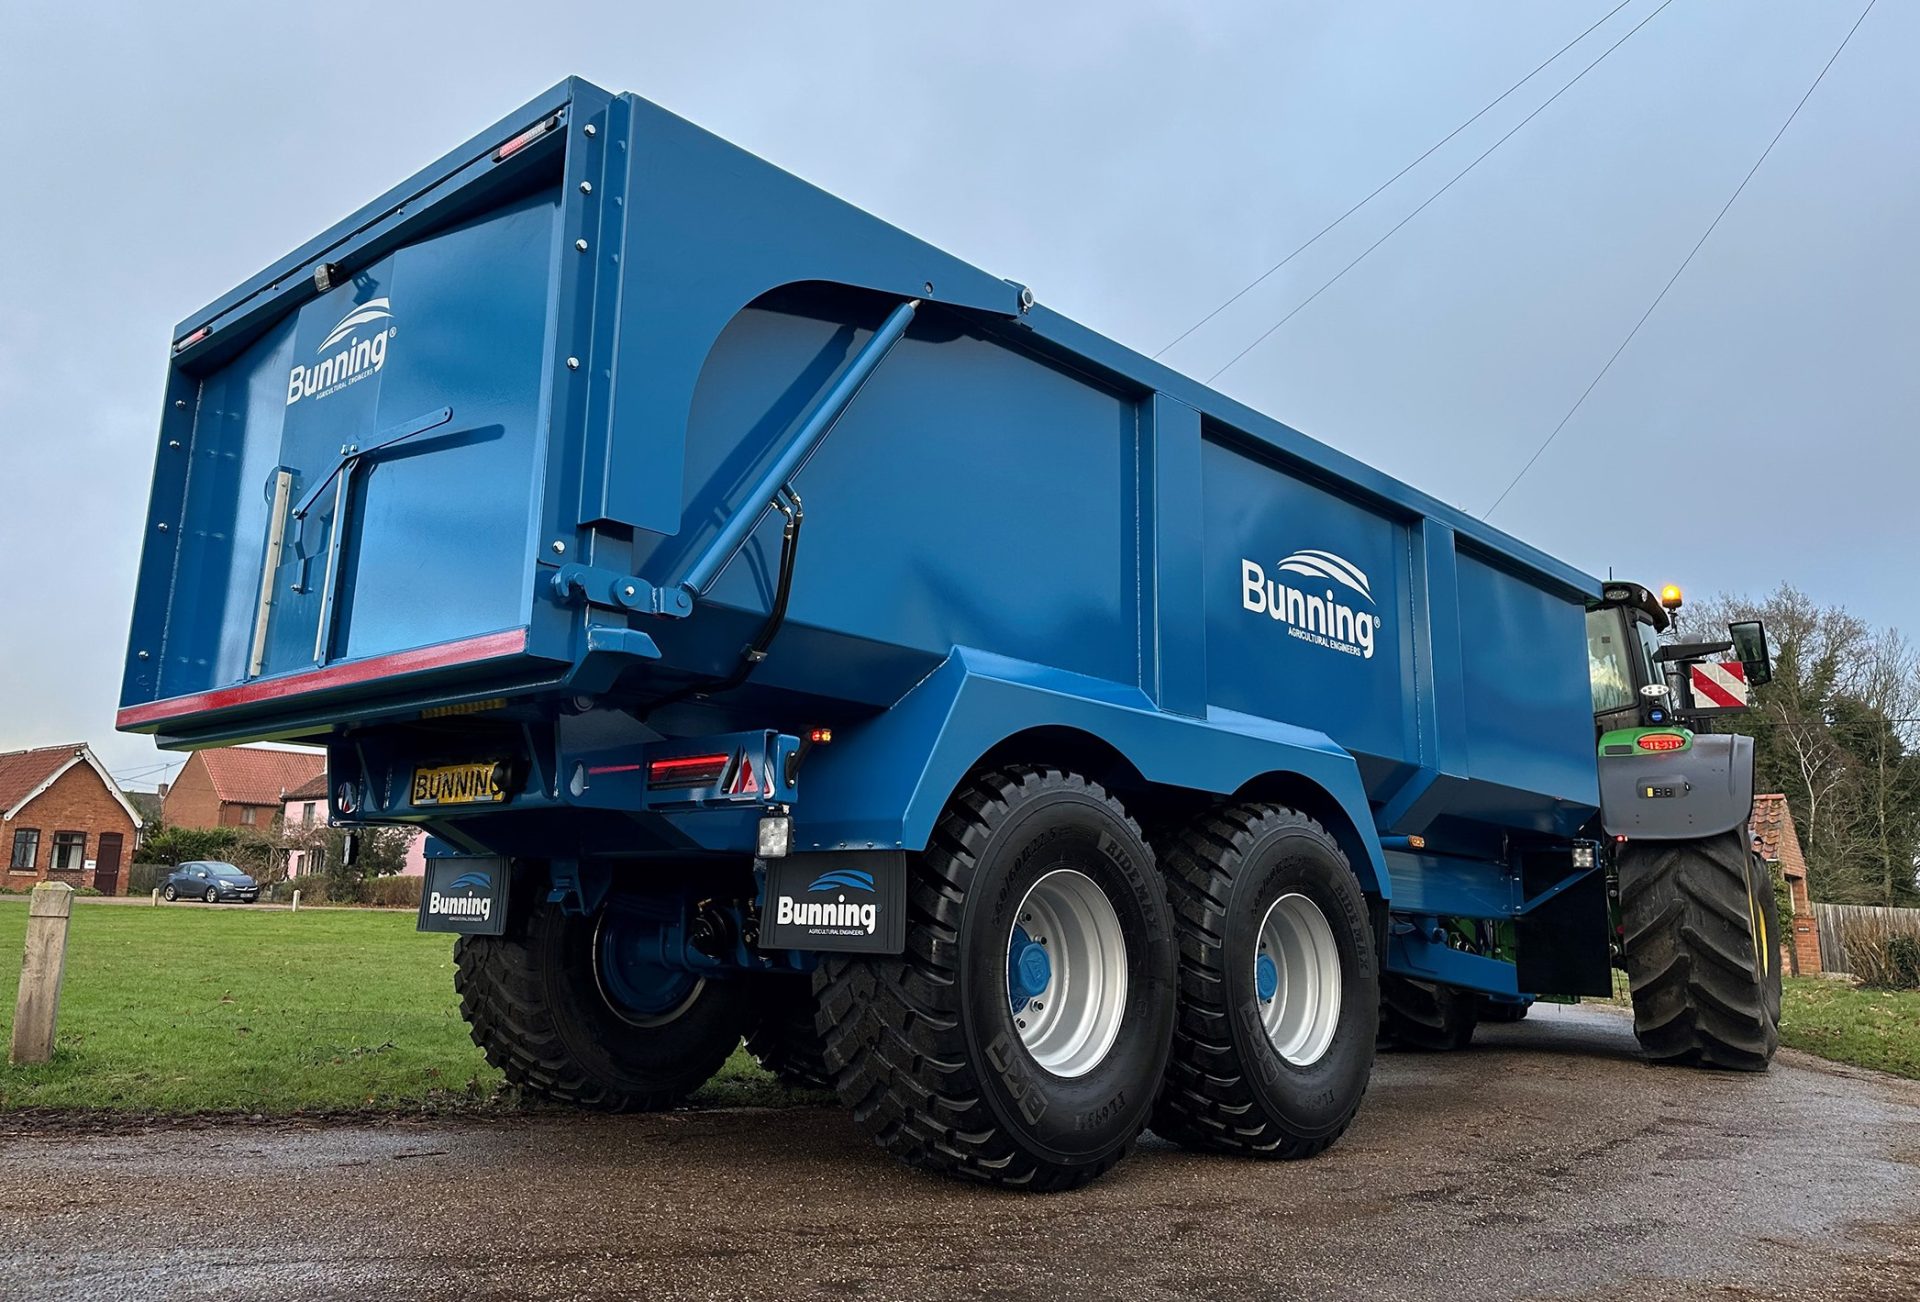 Scottish debut for new Bunning trailers